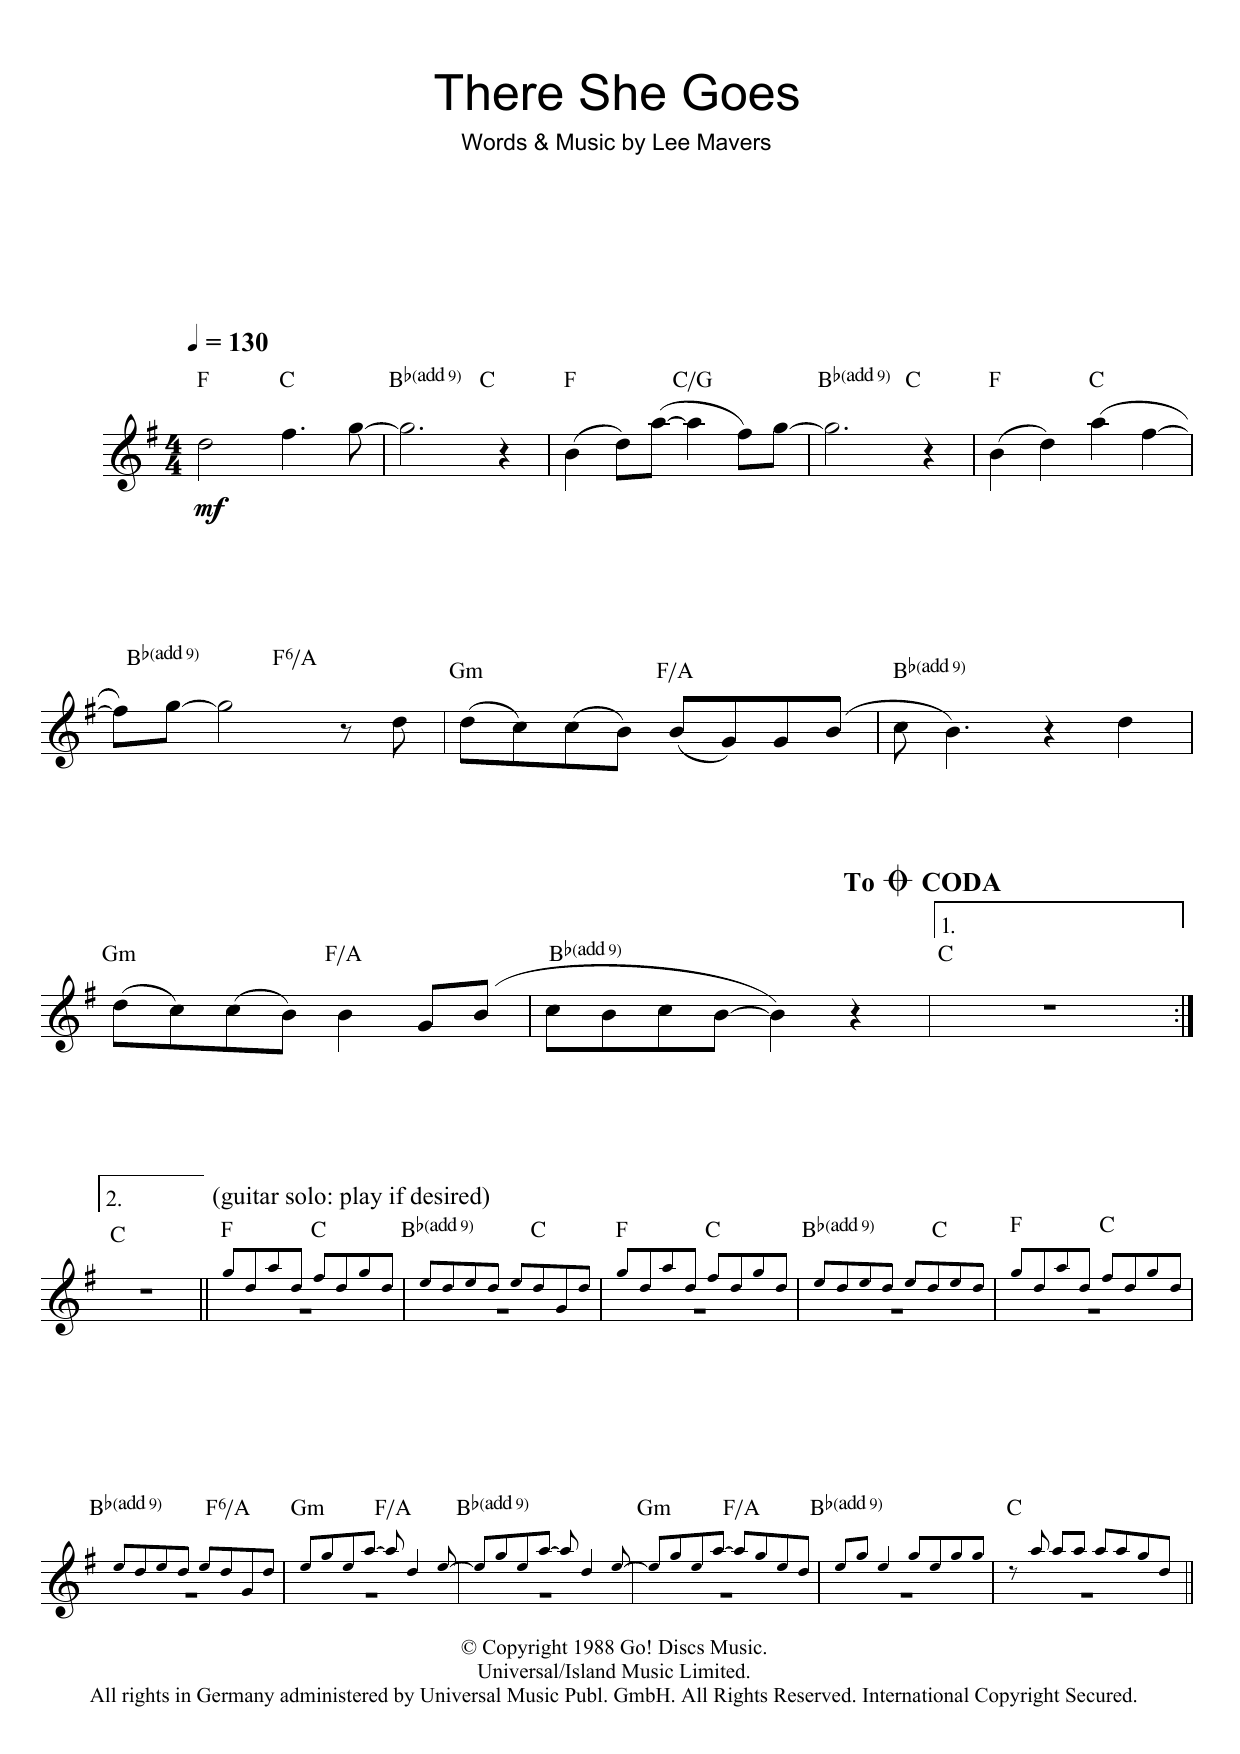 Download The La's There She Goes Sheet Music